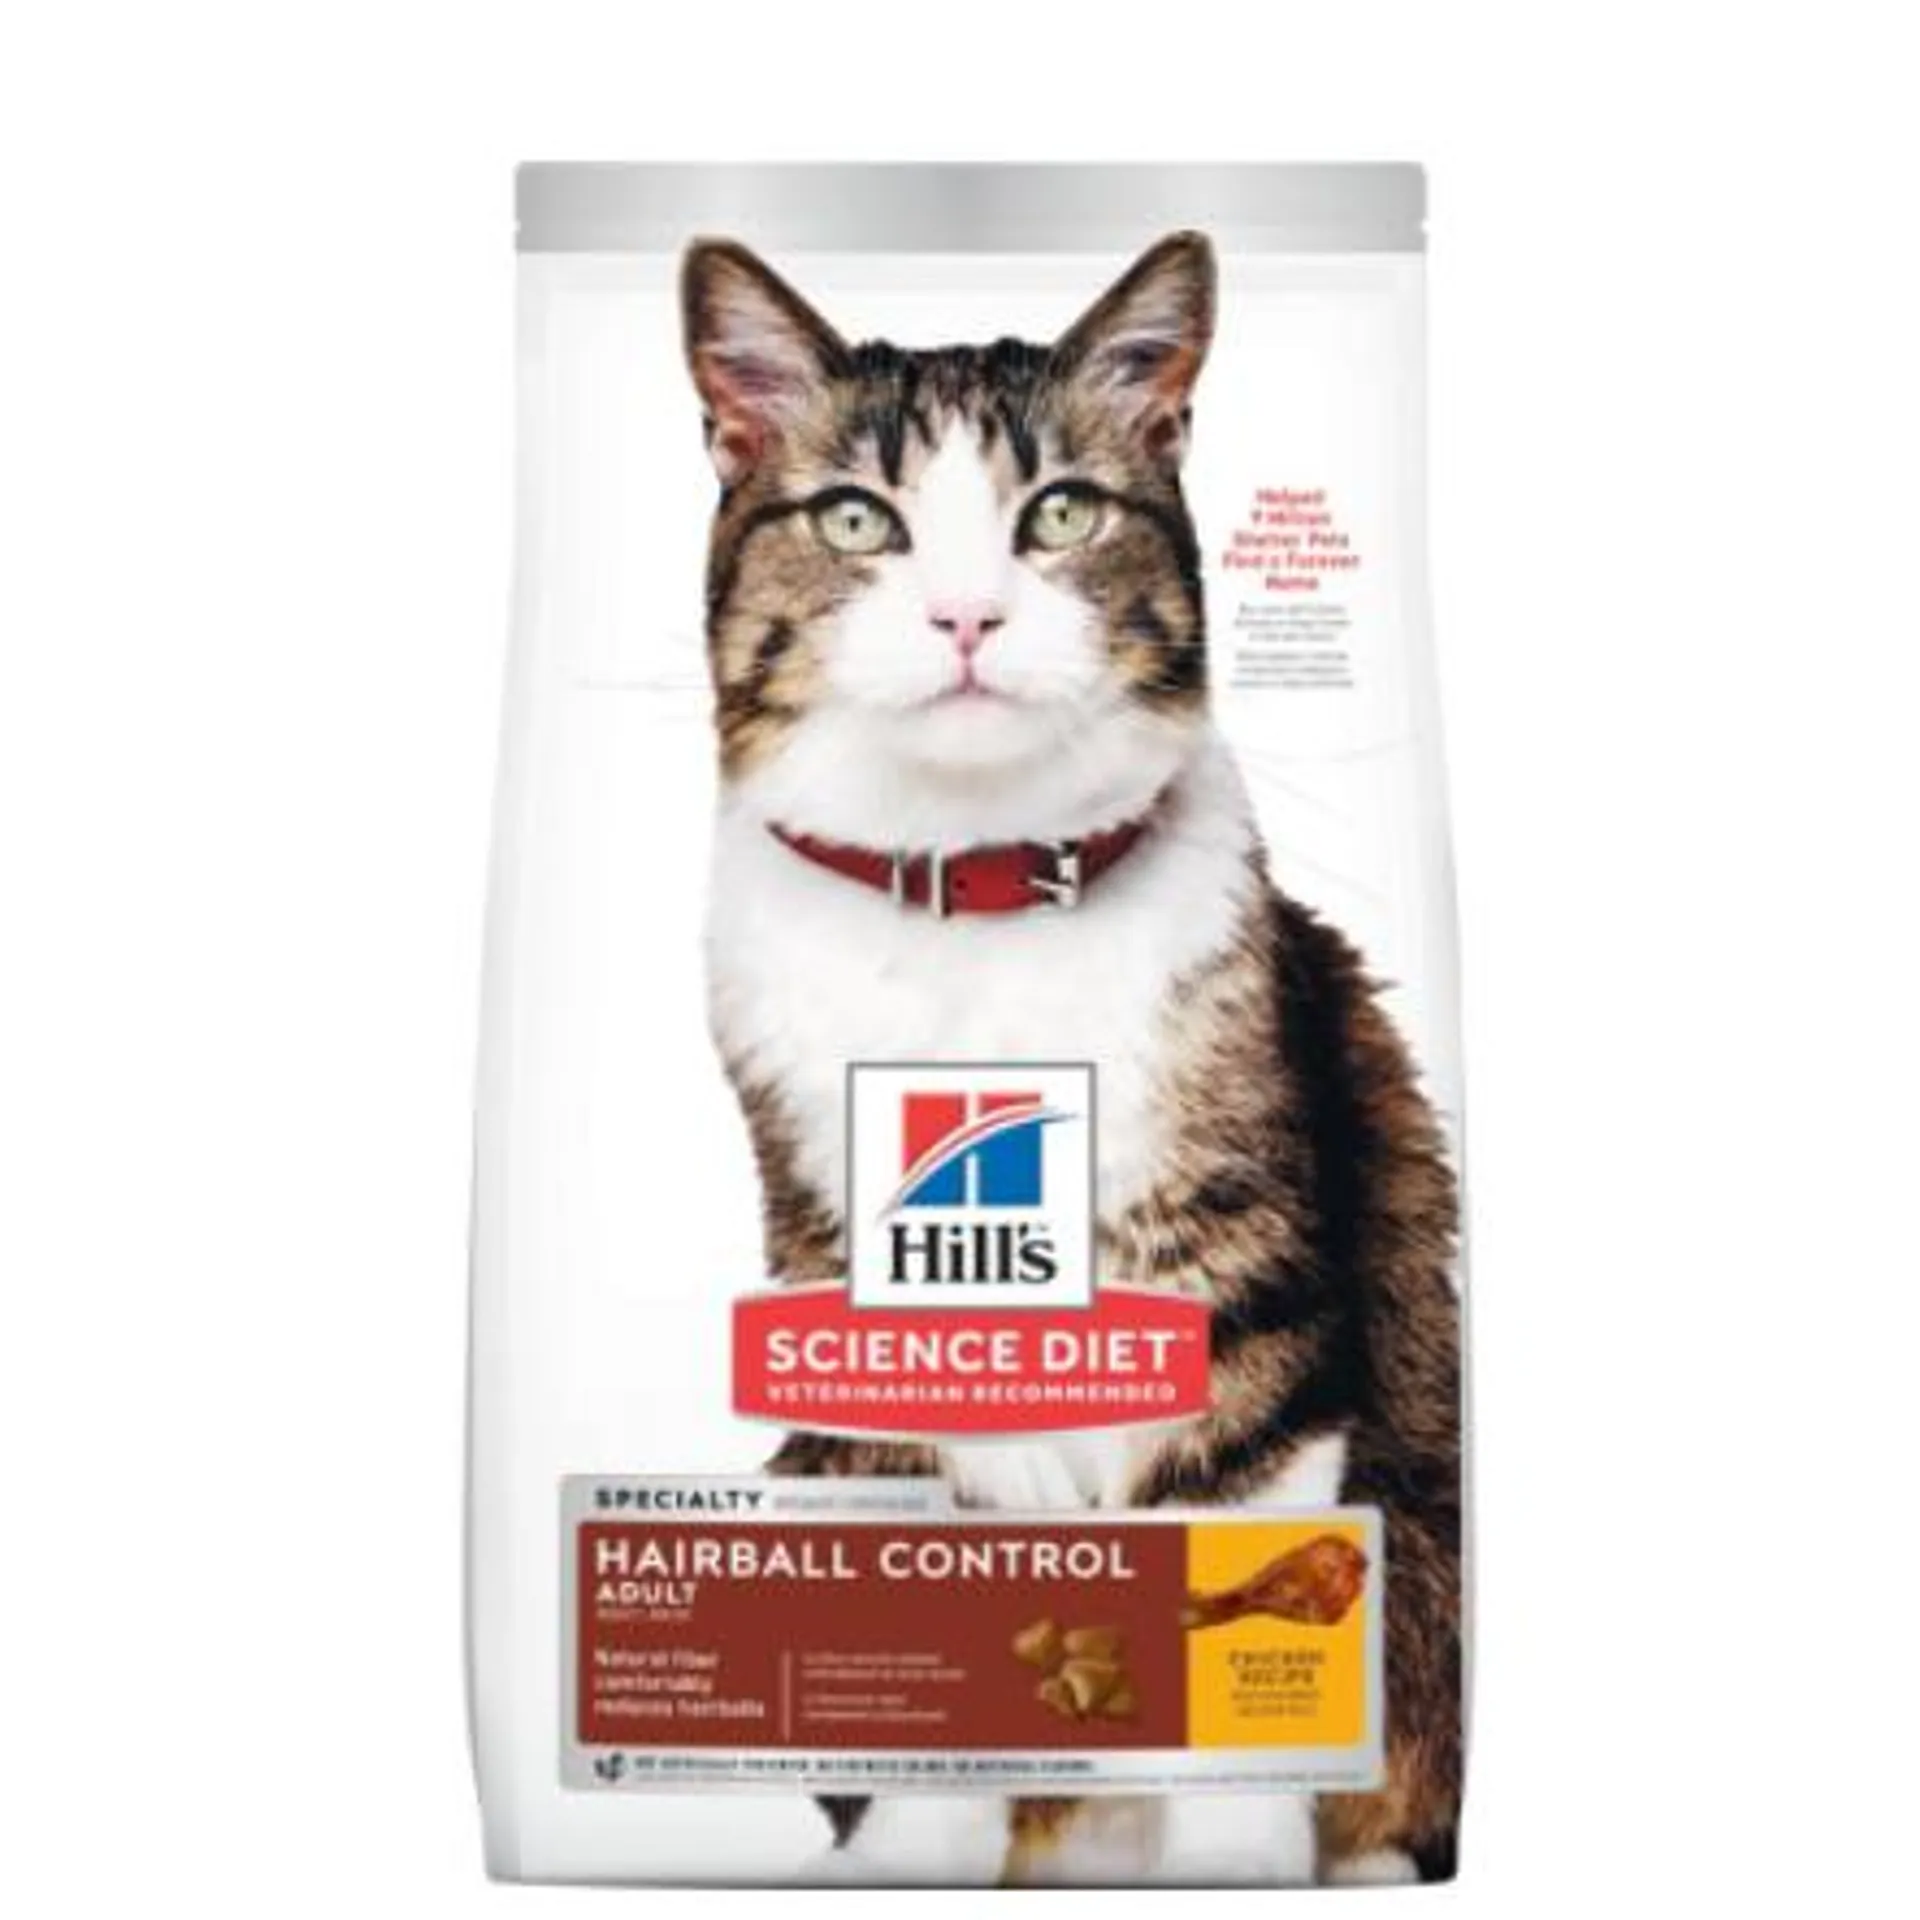 Hill's Science Diet Adult Hairball Control cat food 7lb